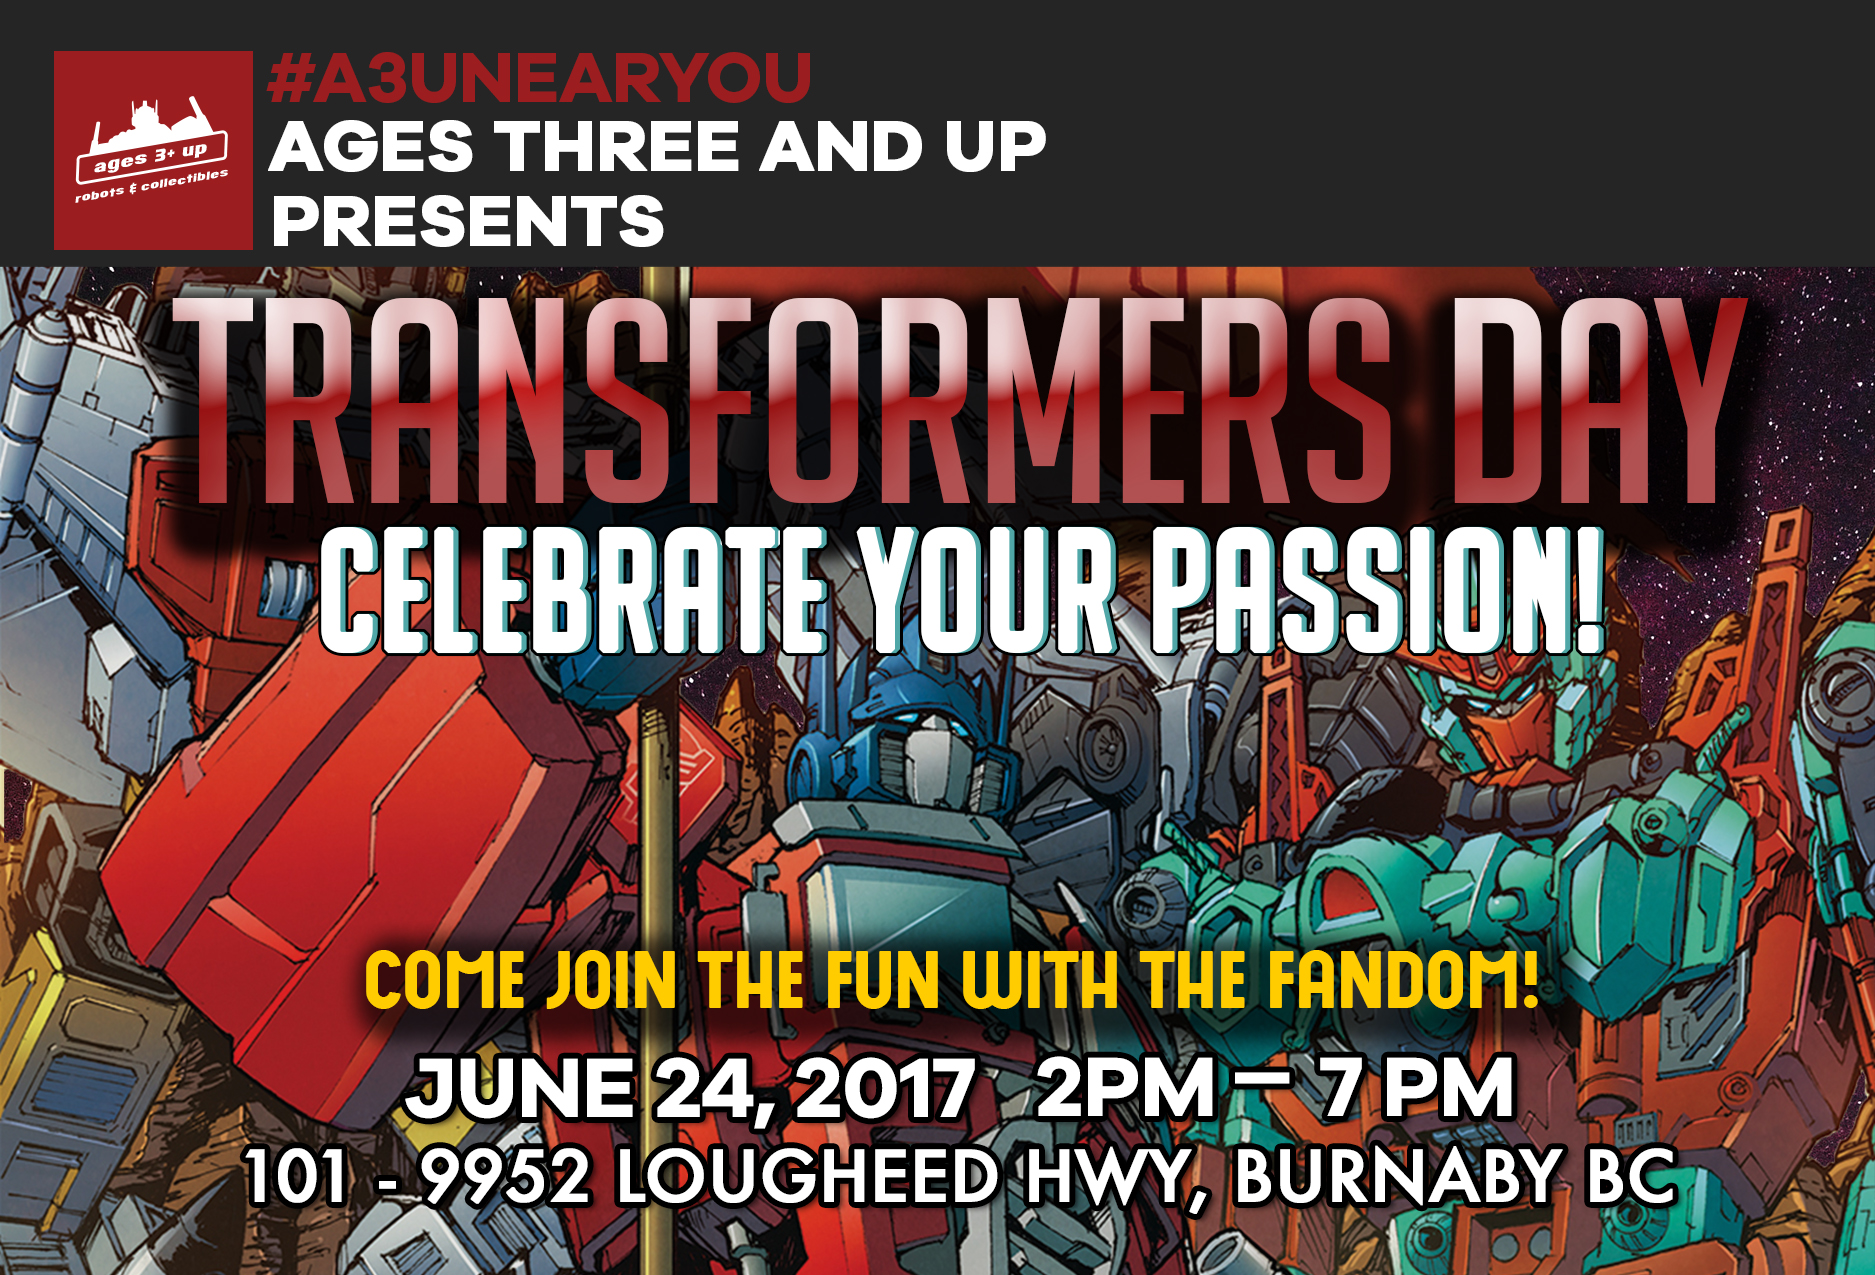 Ages Three And Up Presents: Transformers Day!